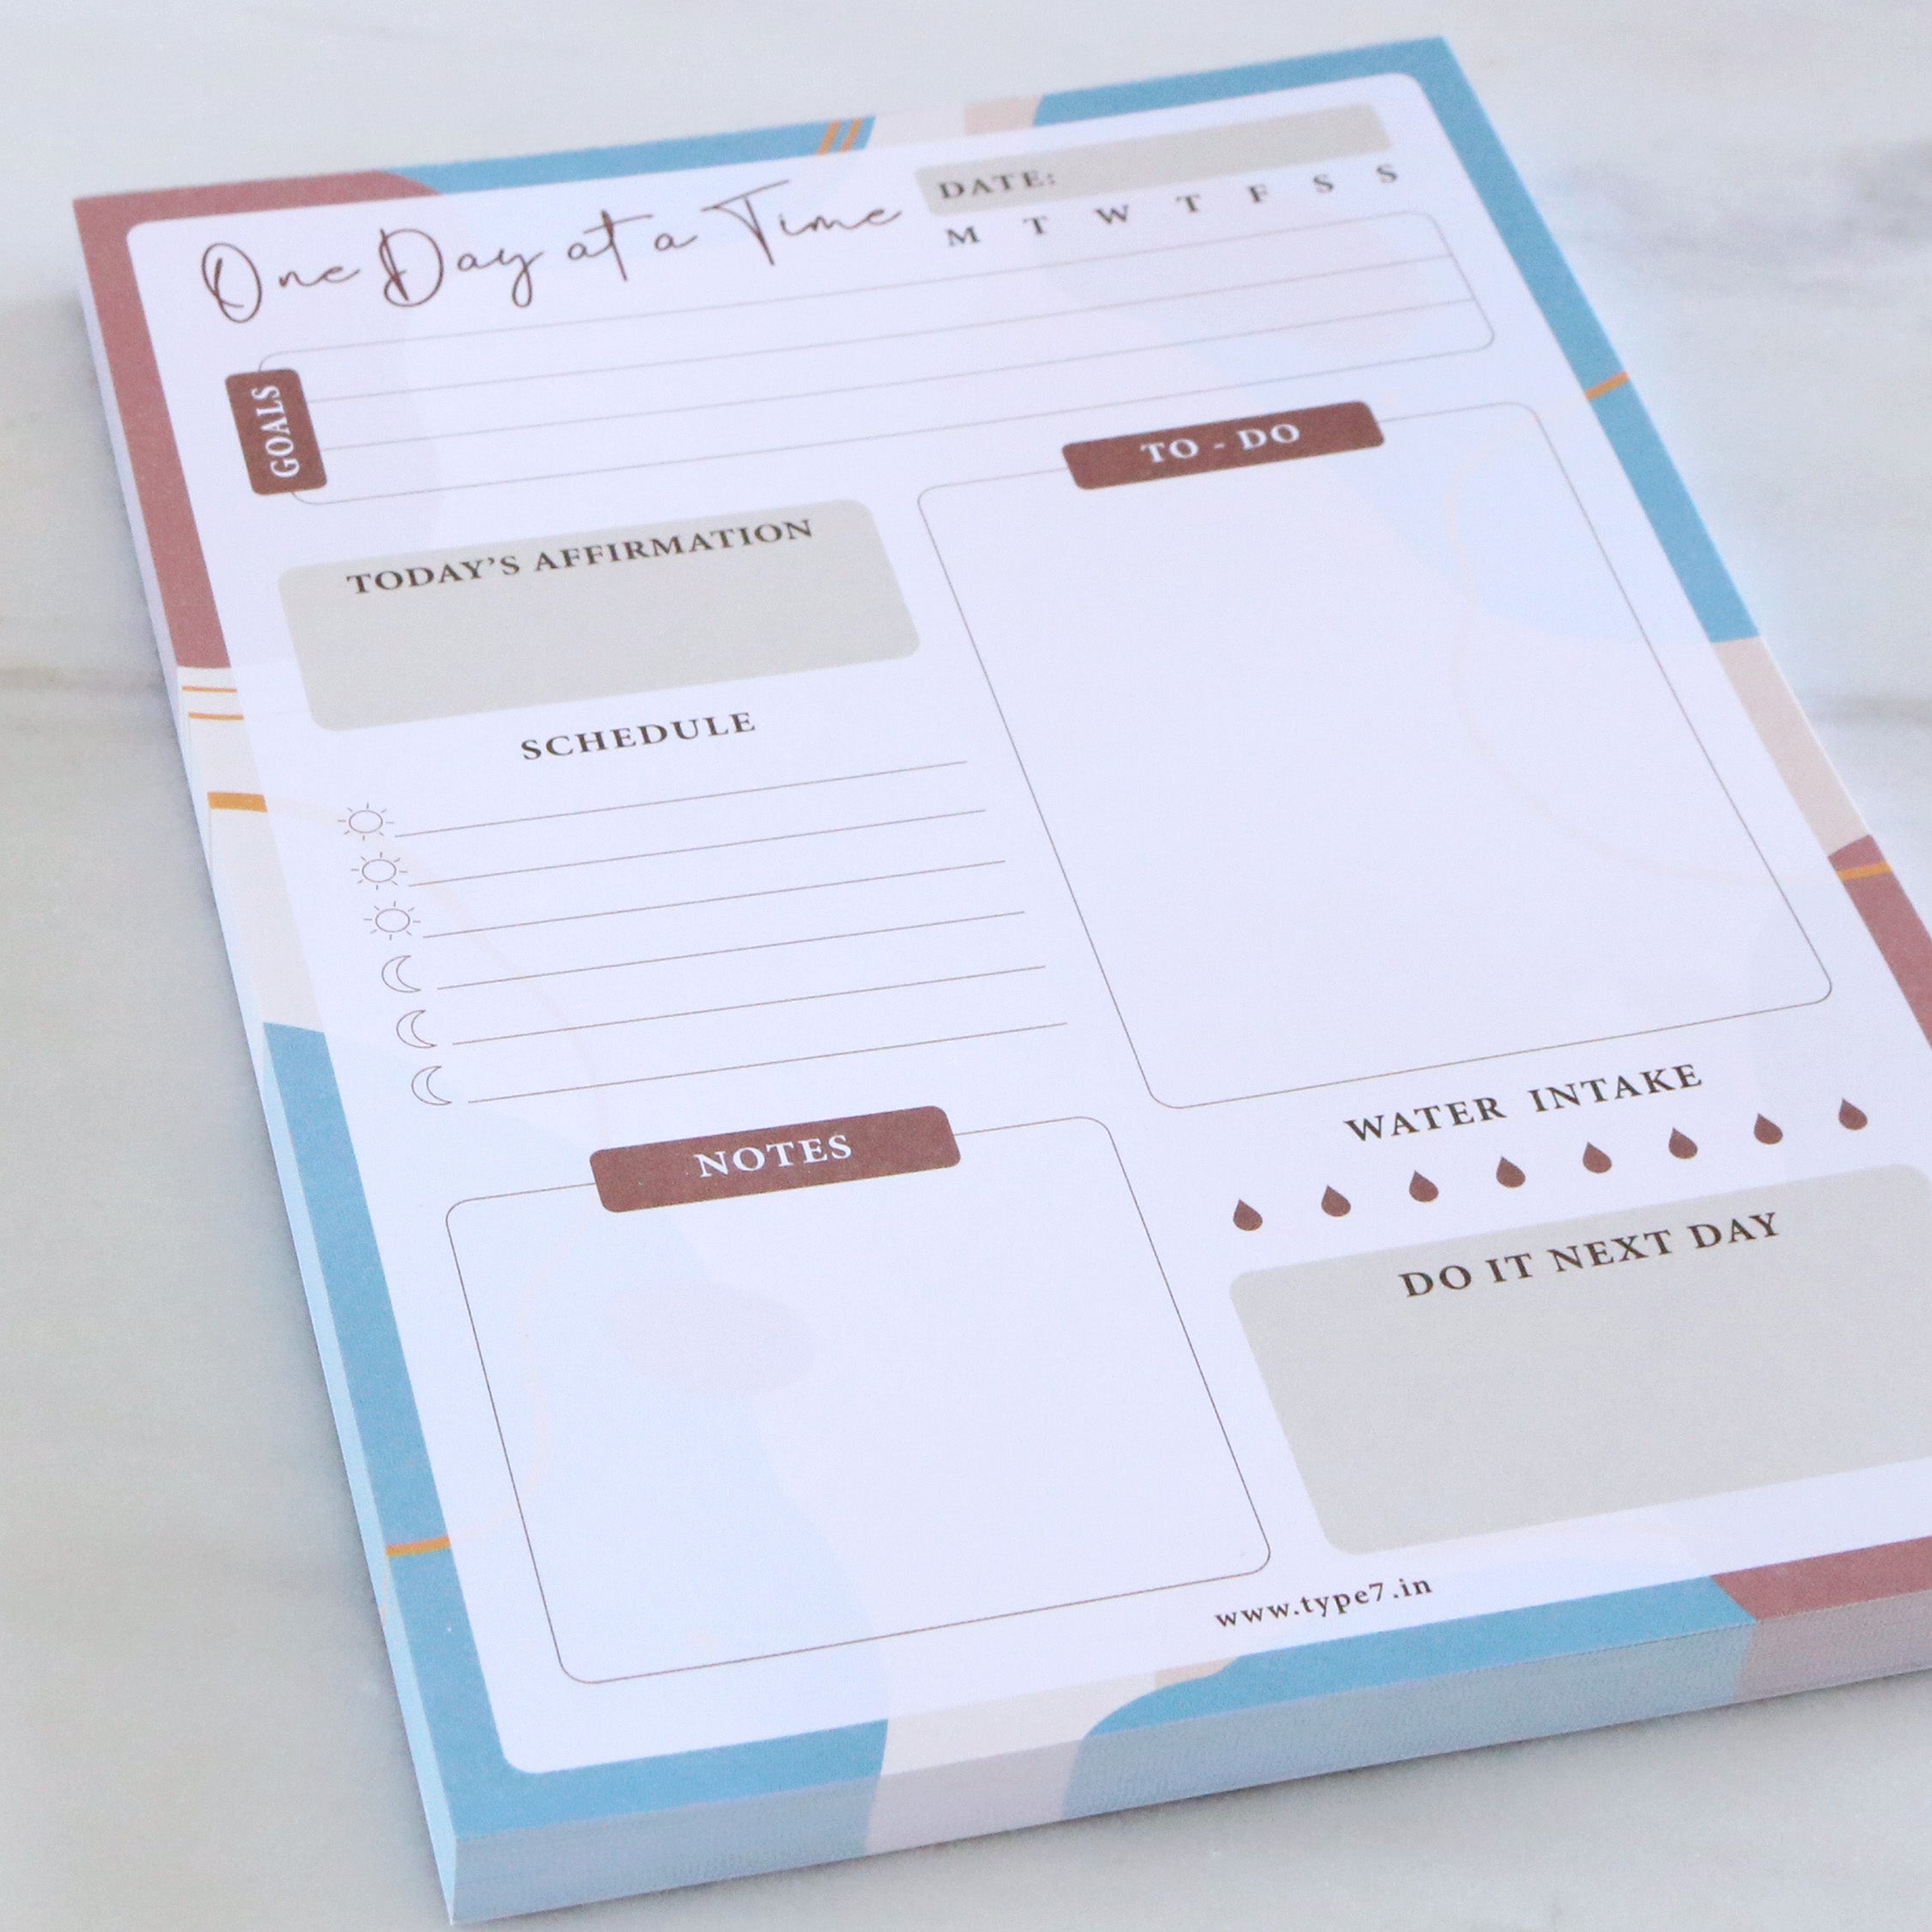 Let's Plan Today - Day Organiser